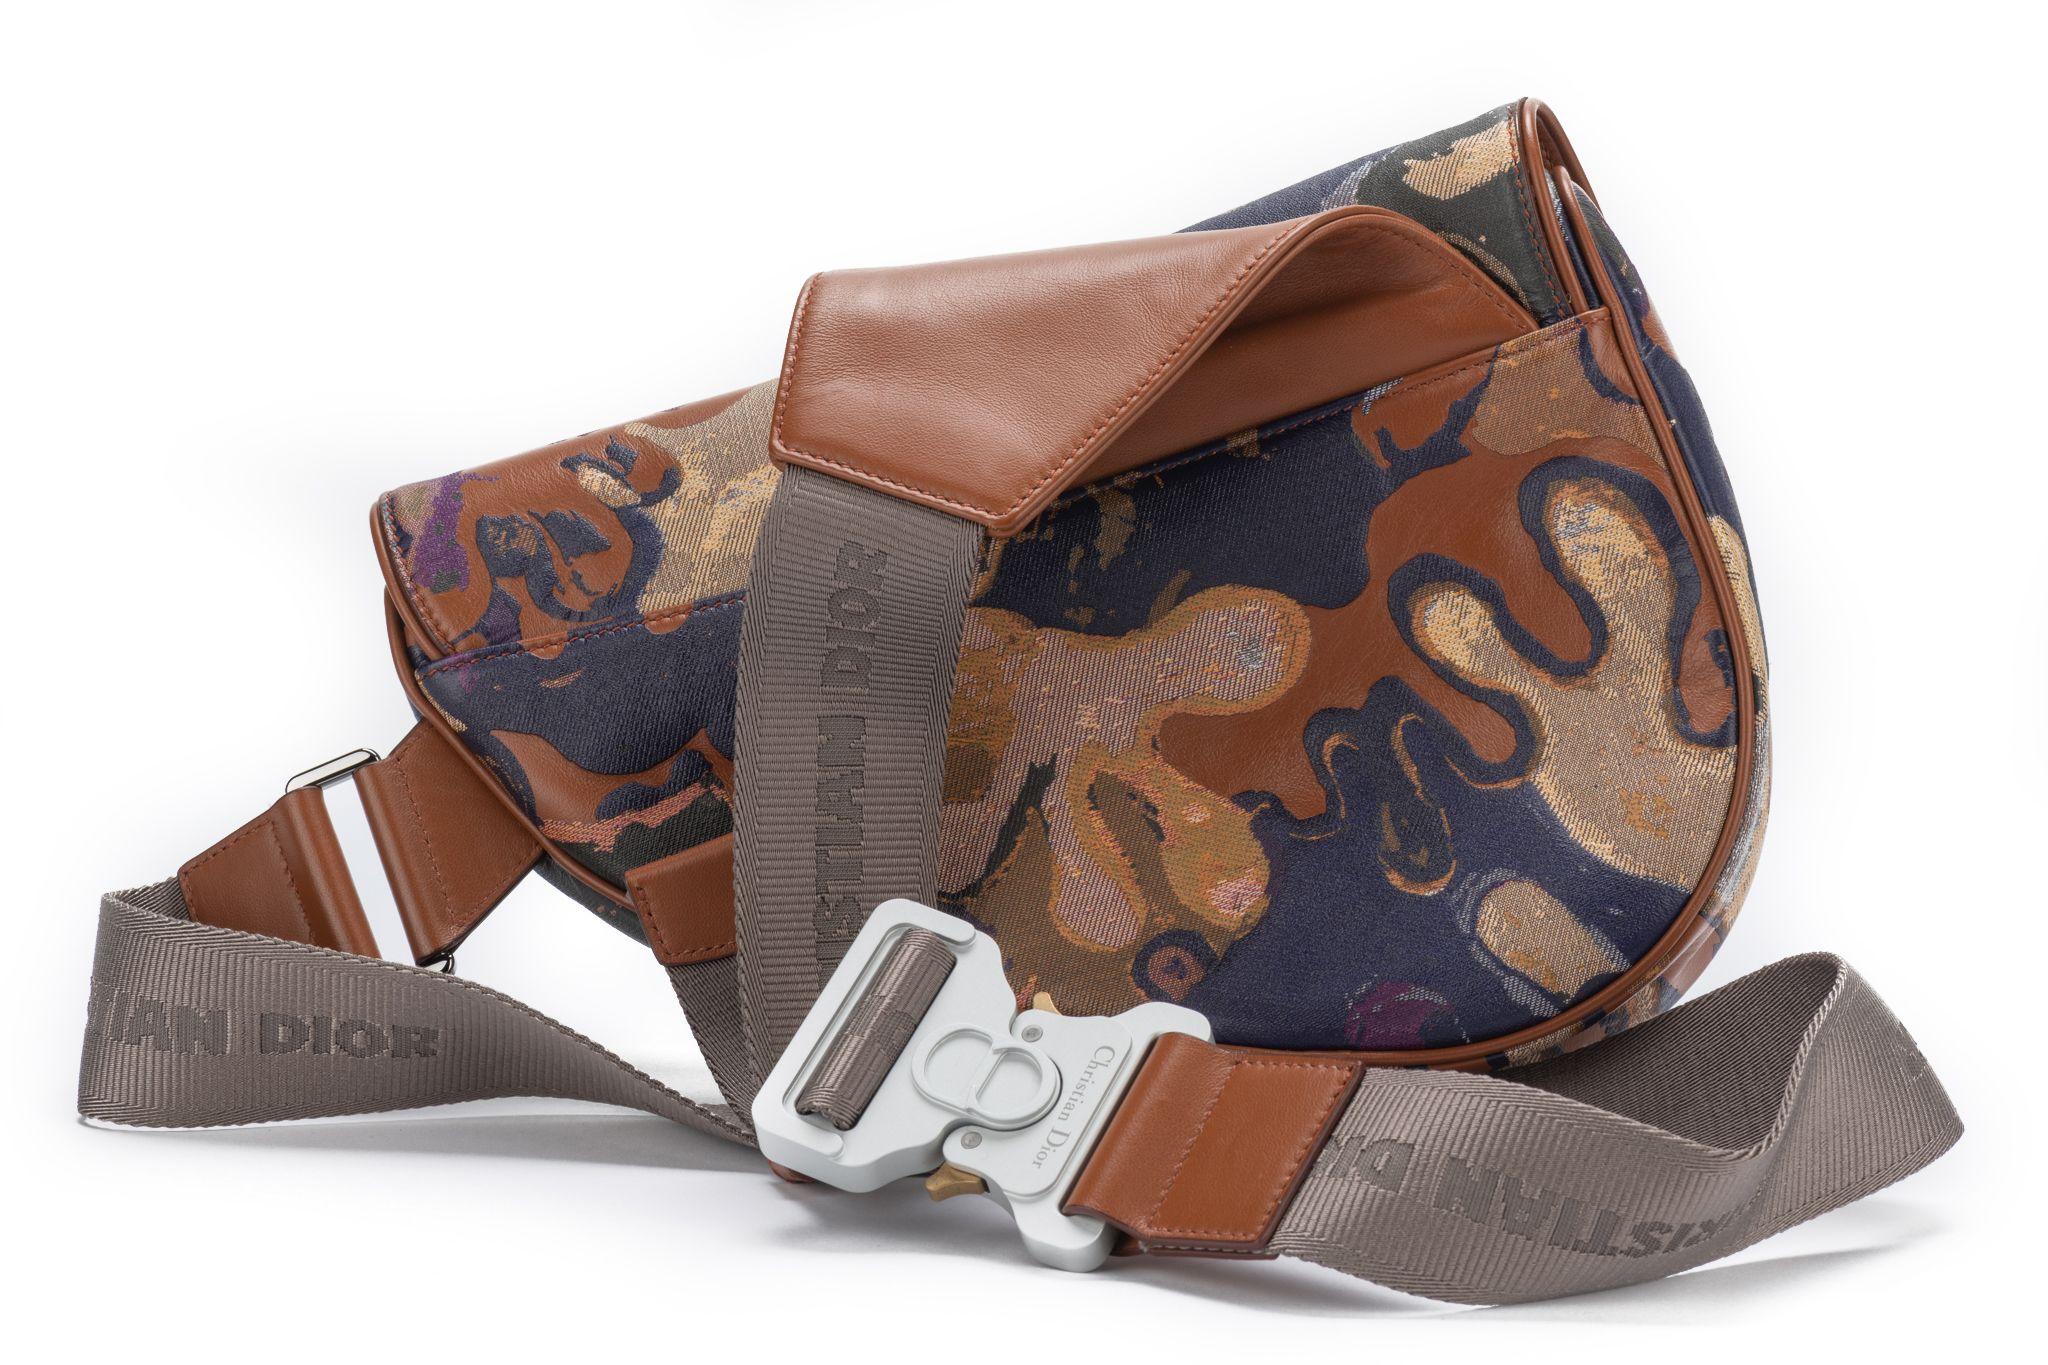 Dior Peter Doig Saddle Crossbody Belt Bag with an adjustable shoulder strap which measures 20”. It comes with the original dustcover.